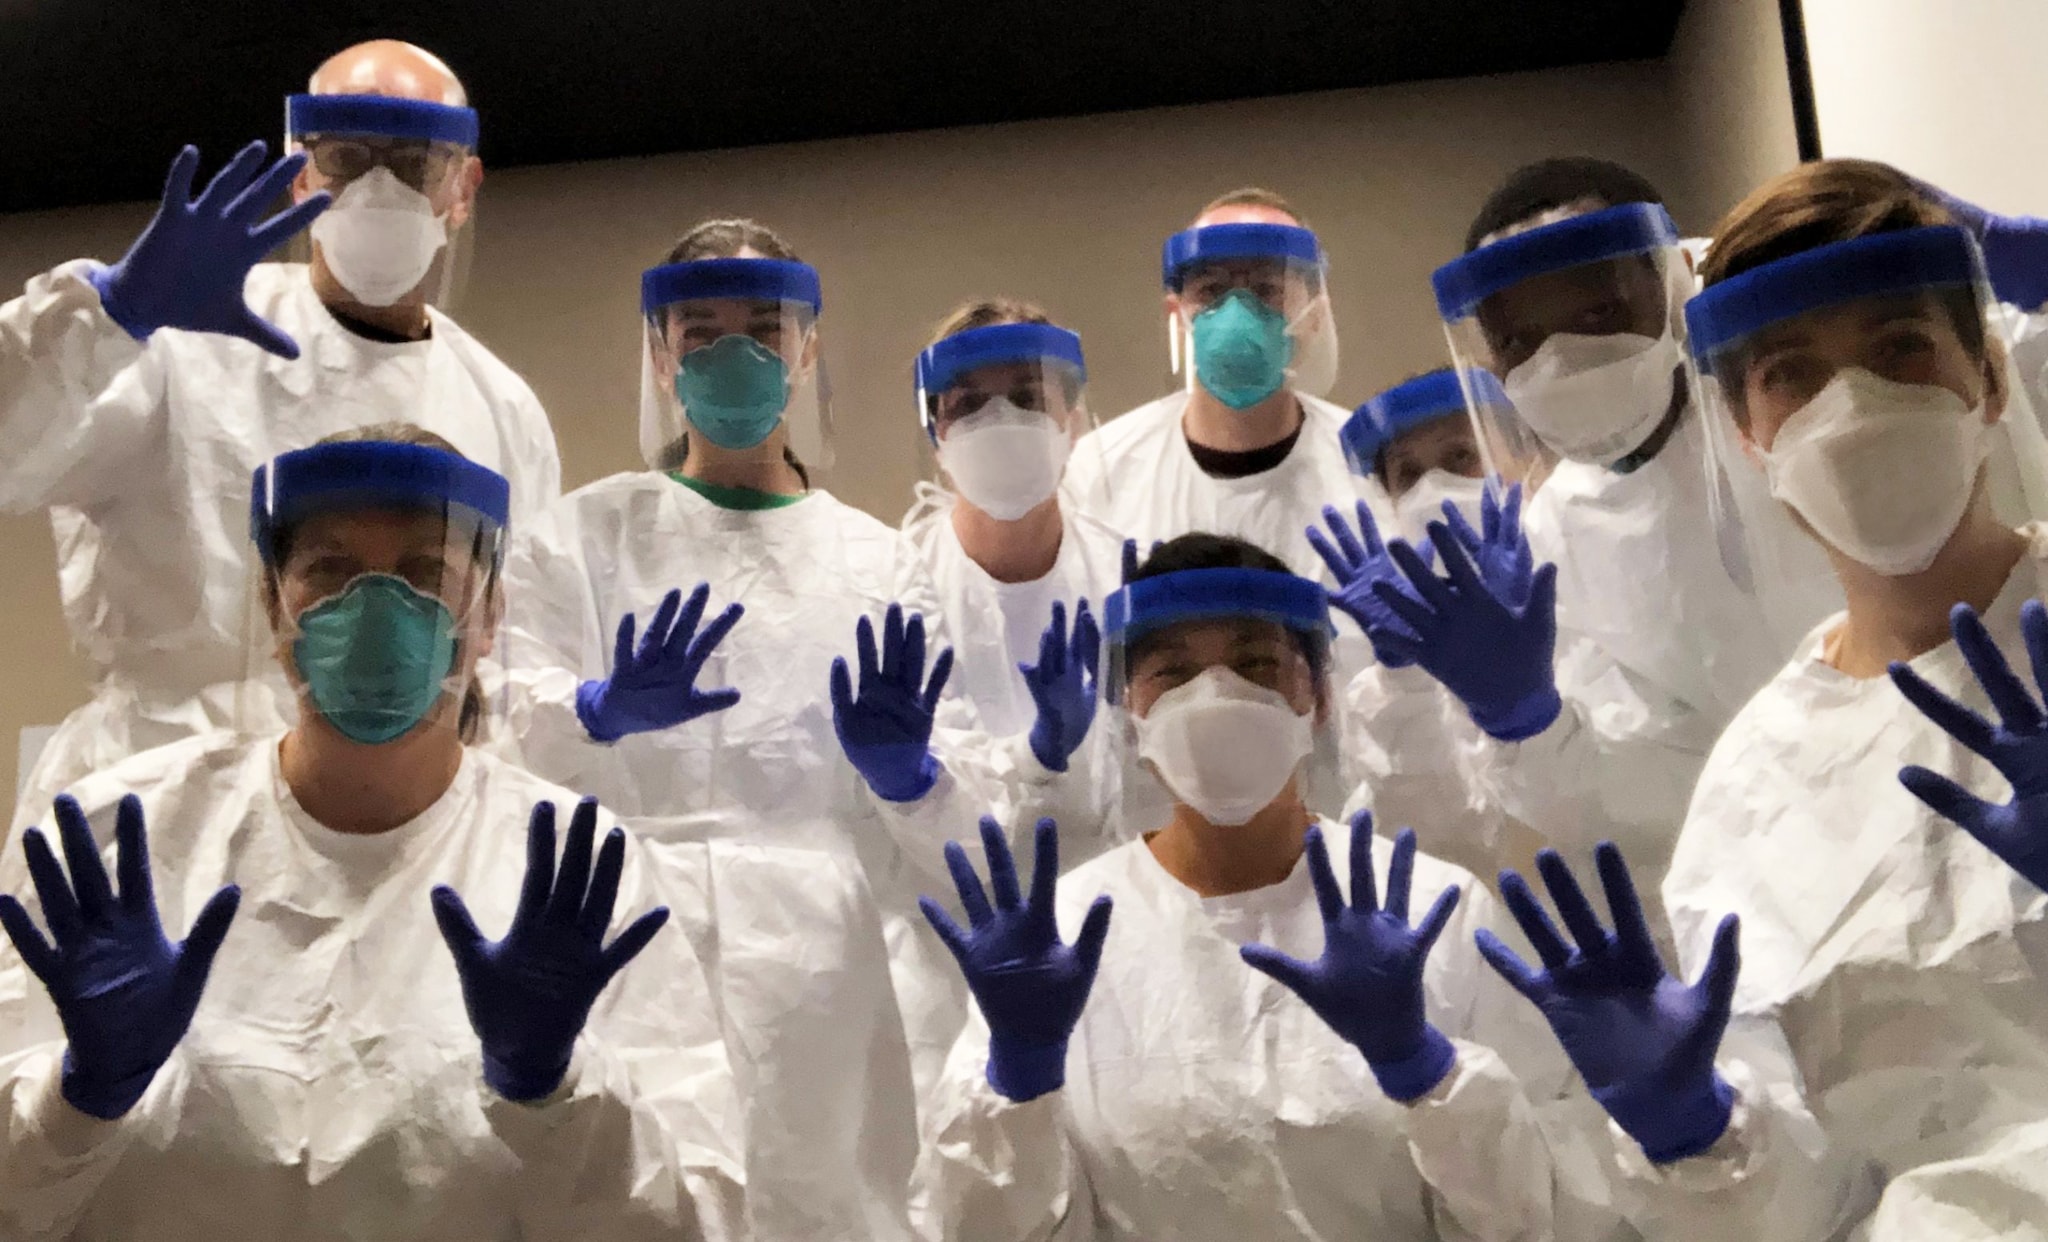 CDC deployers practice in personal protective equipment before going door-to-door to investigate a COVID-19 outbreak in Utah.  Top row, L-R: Eric Pevzner, Rebecca Chancey, Michelle O’Hegarty, Phillip Salvatore, Jeni Vuong, Henry Njuguna. Front, L-R: Vickie Fields, Cuc Tran, Katie Battey.